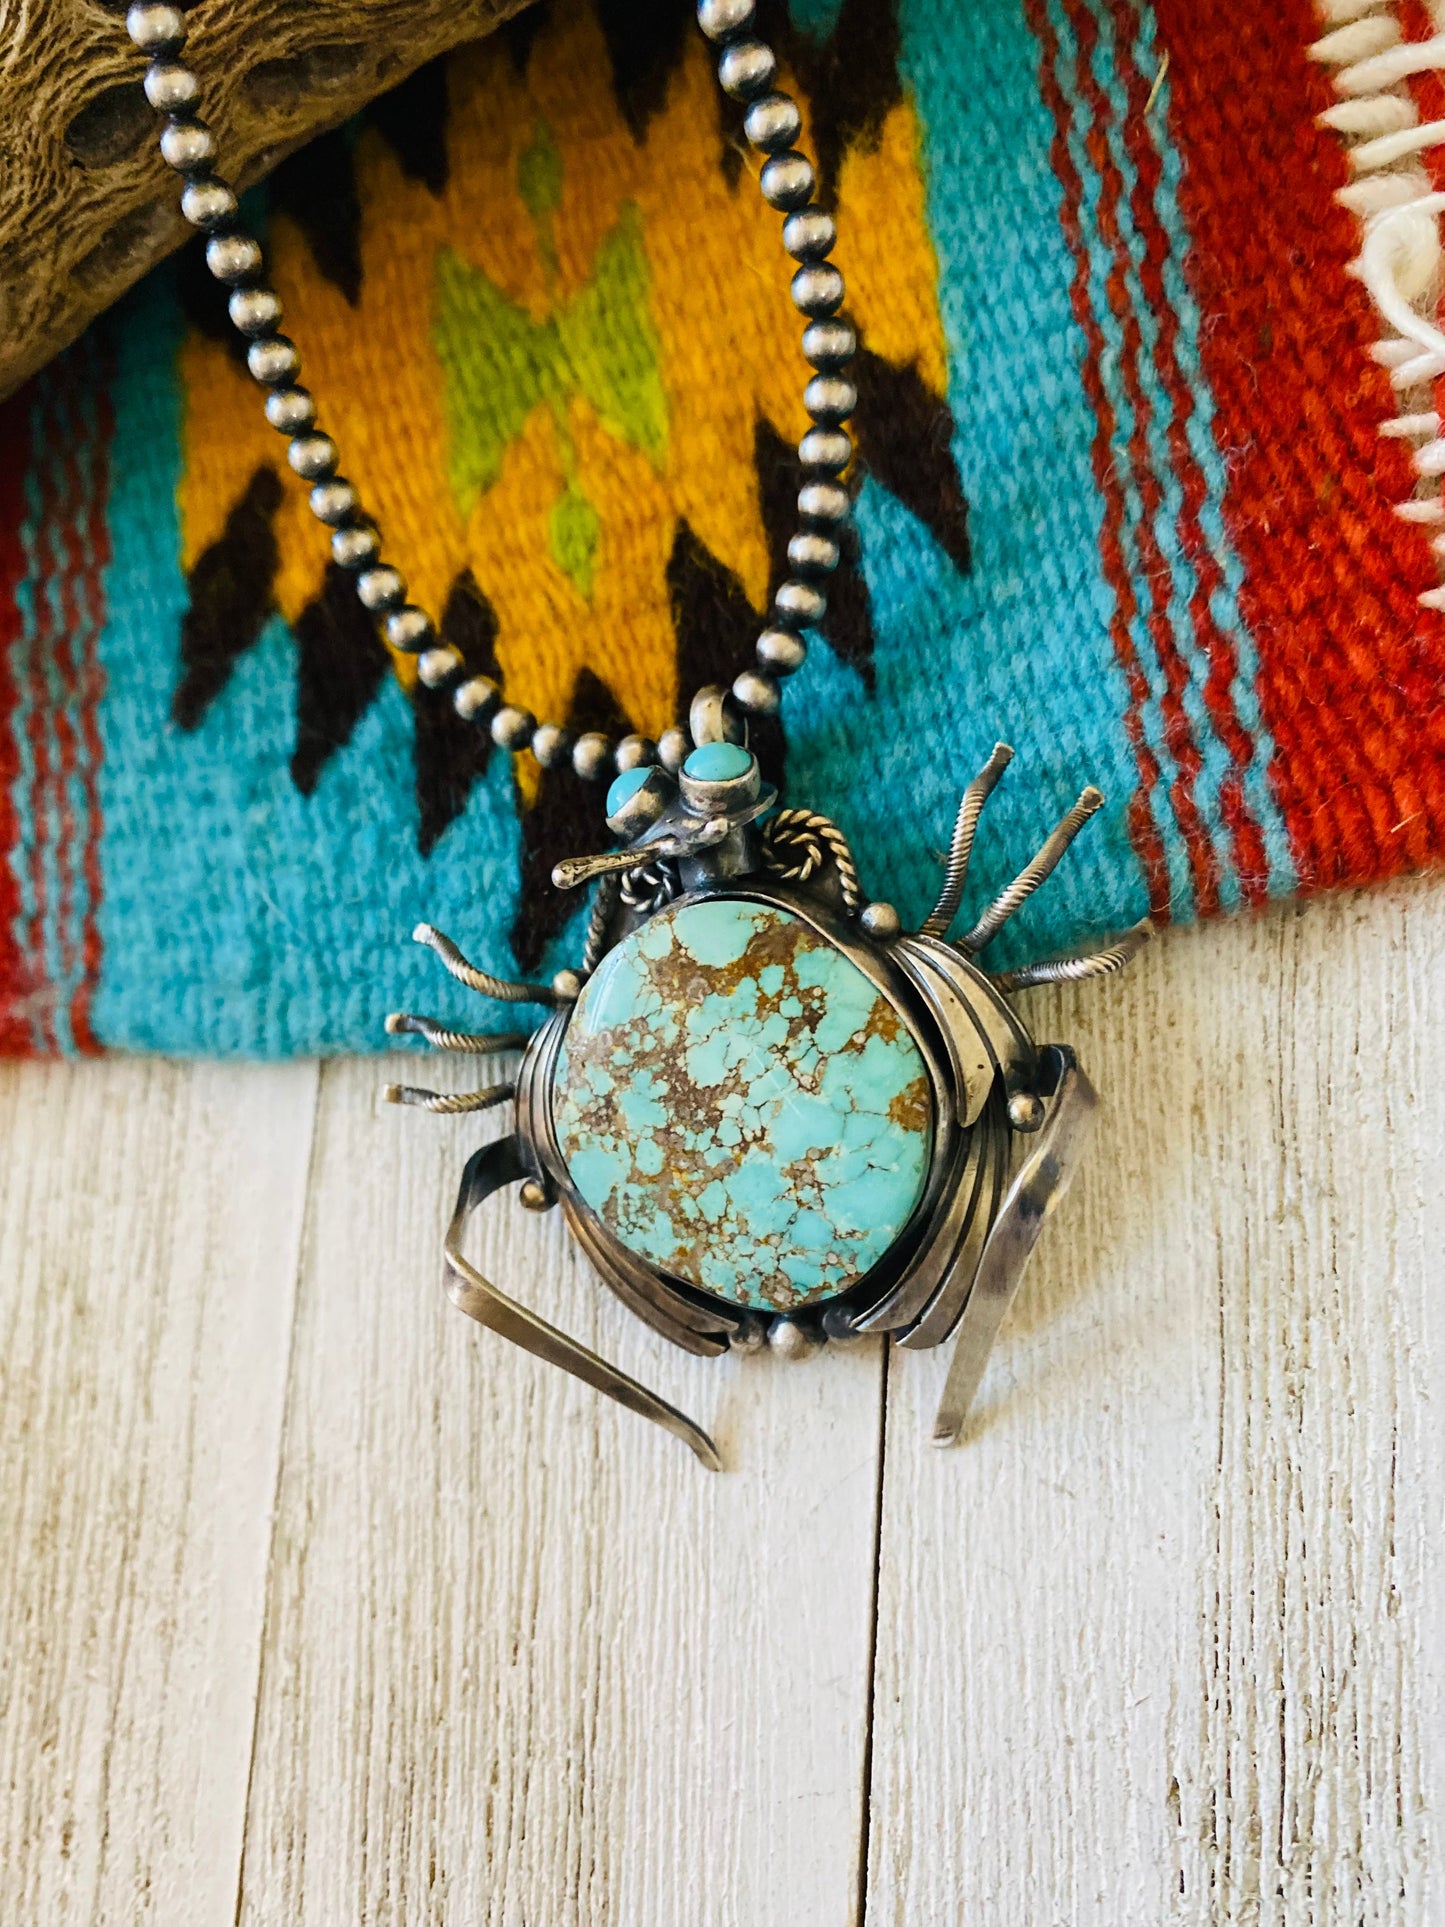 Navajo Sterling Silver & Number 8 Mountain Beetle Turquoise Pendant